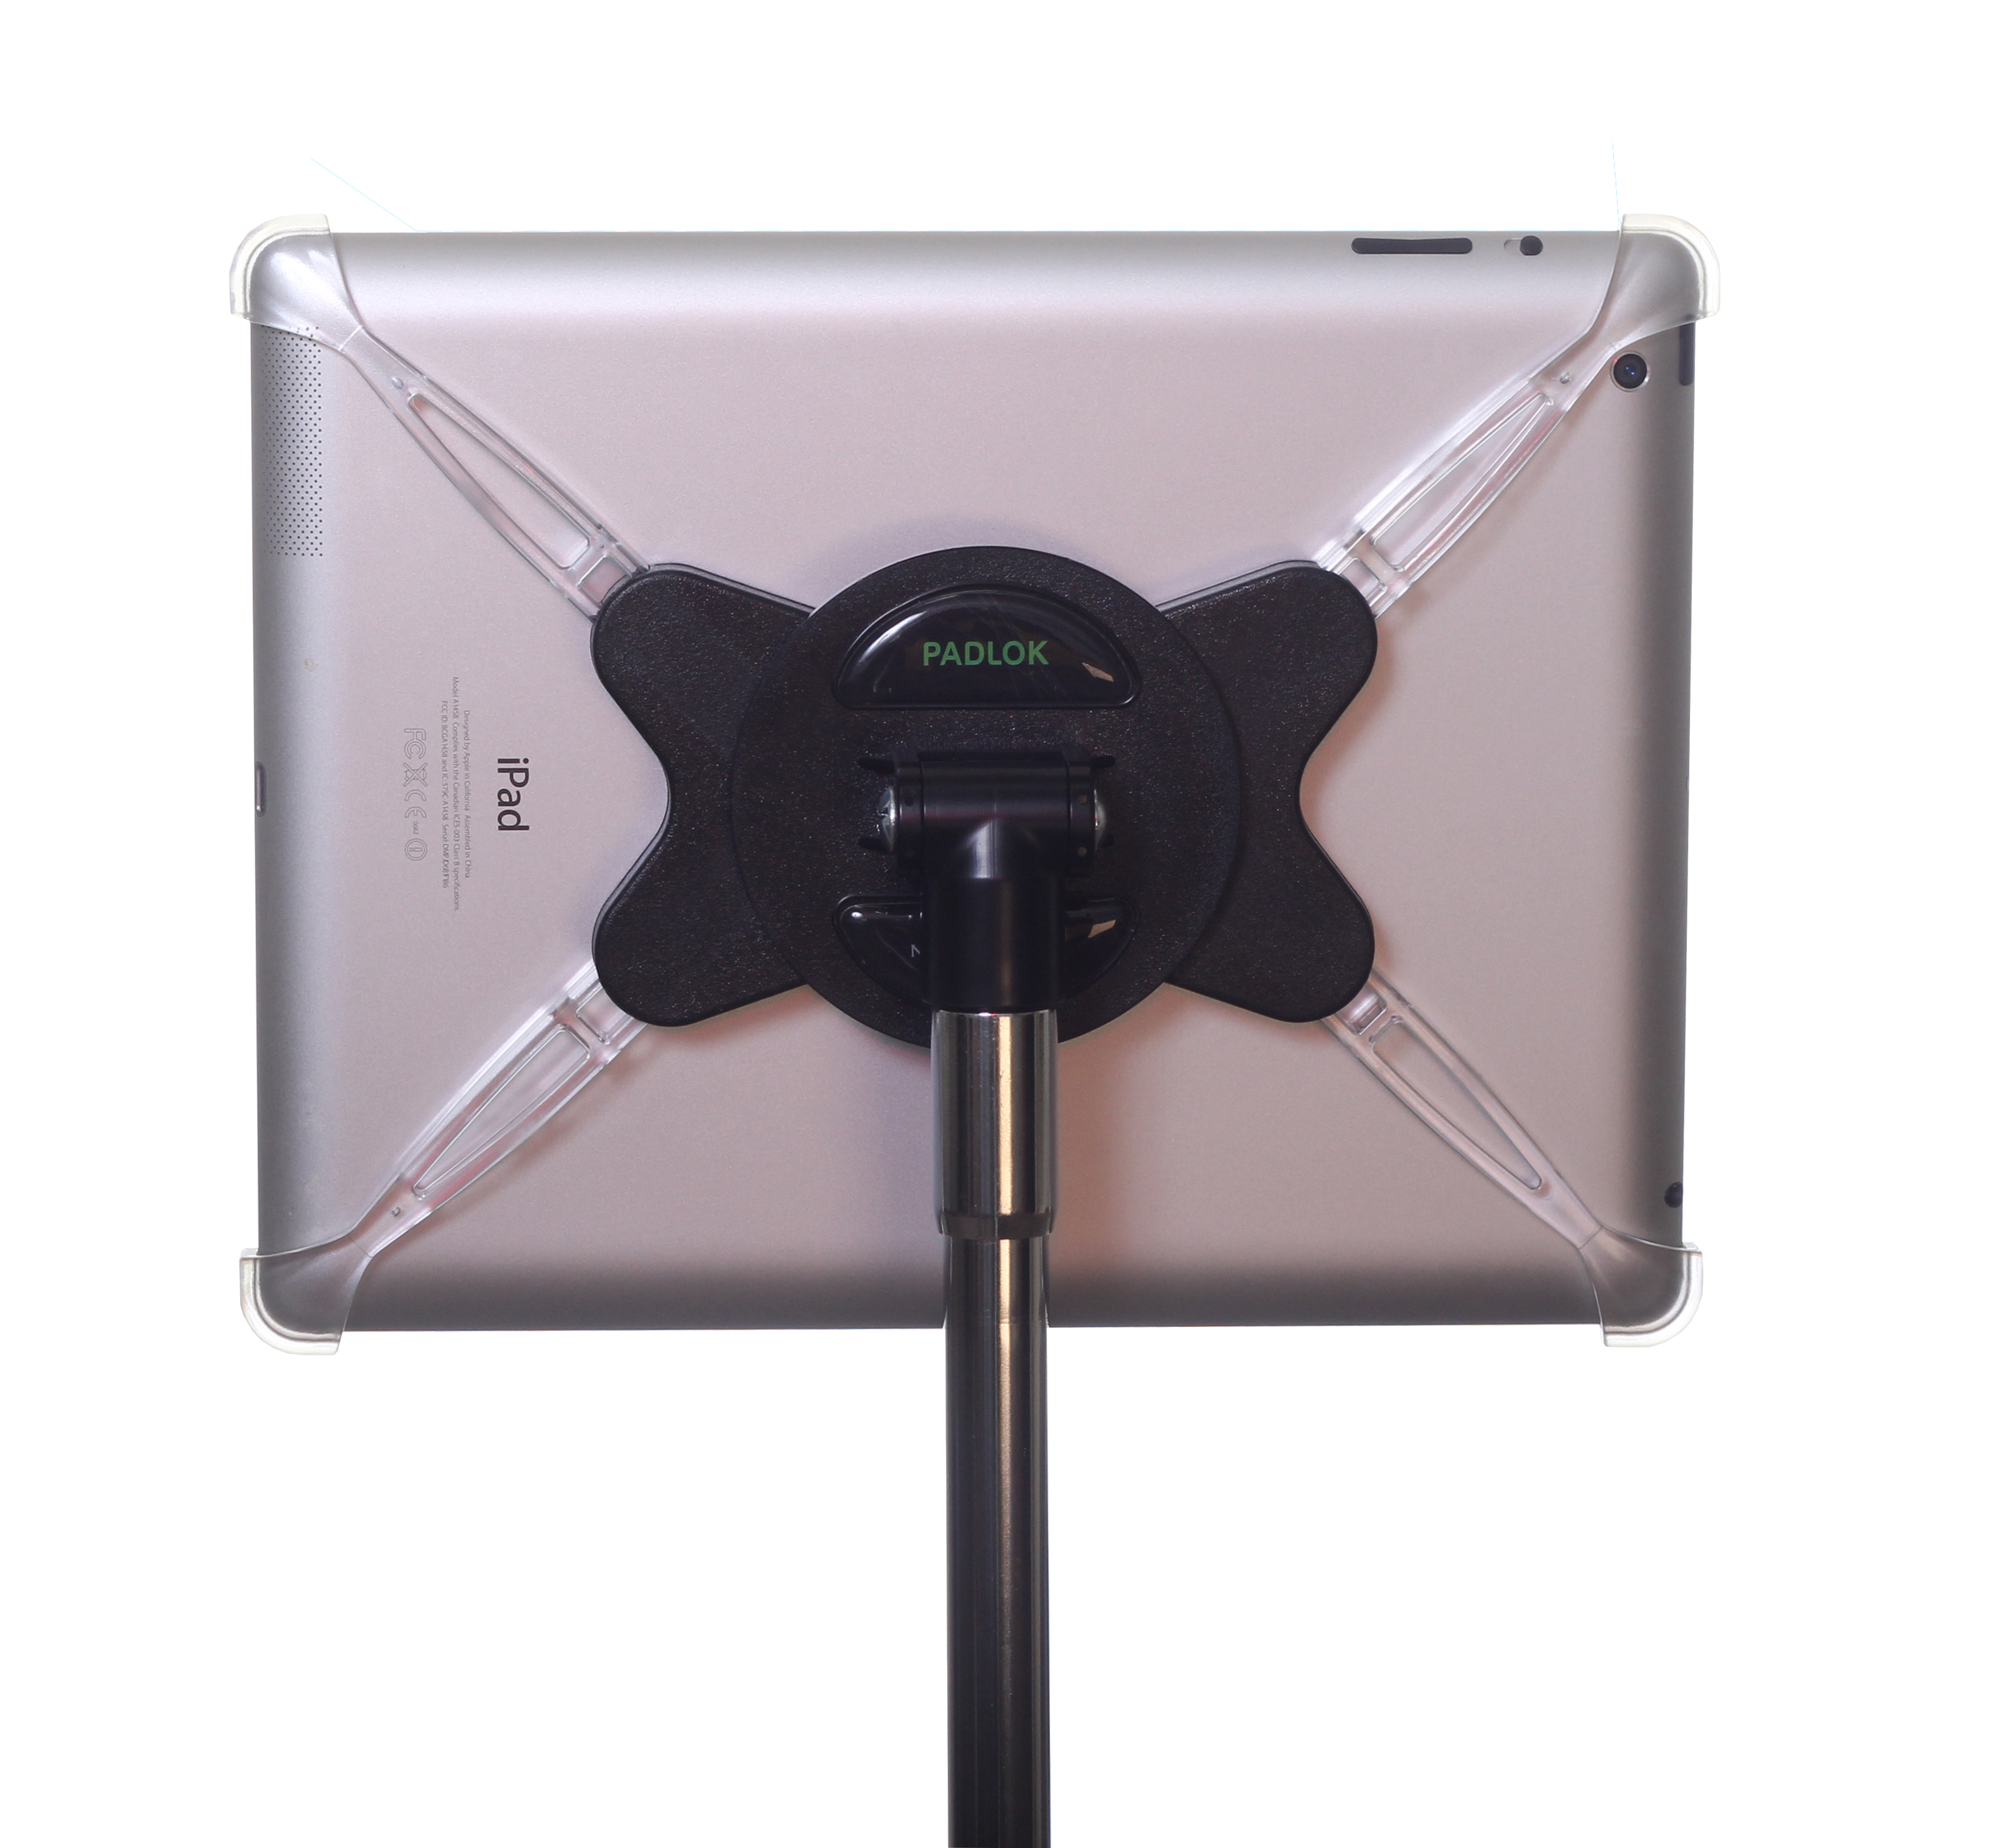 PADLOK can be smoothly rotated 360 degrees with locking positions in portrait and landscape positions